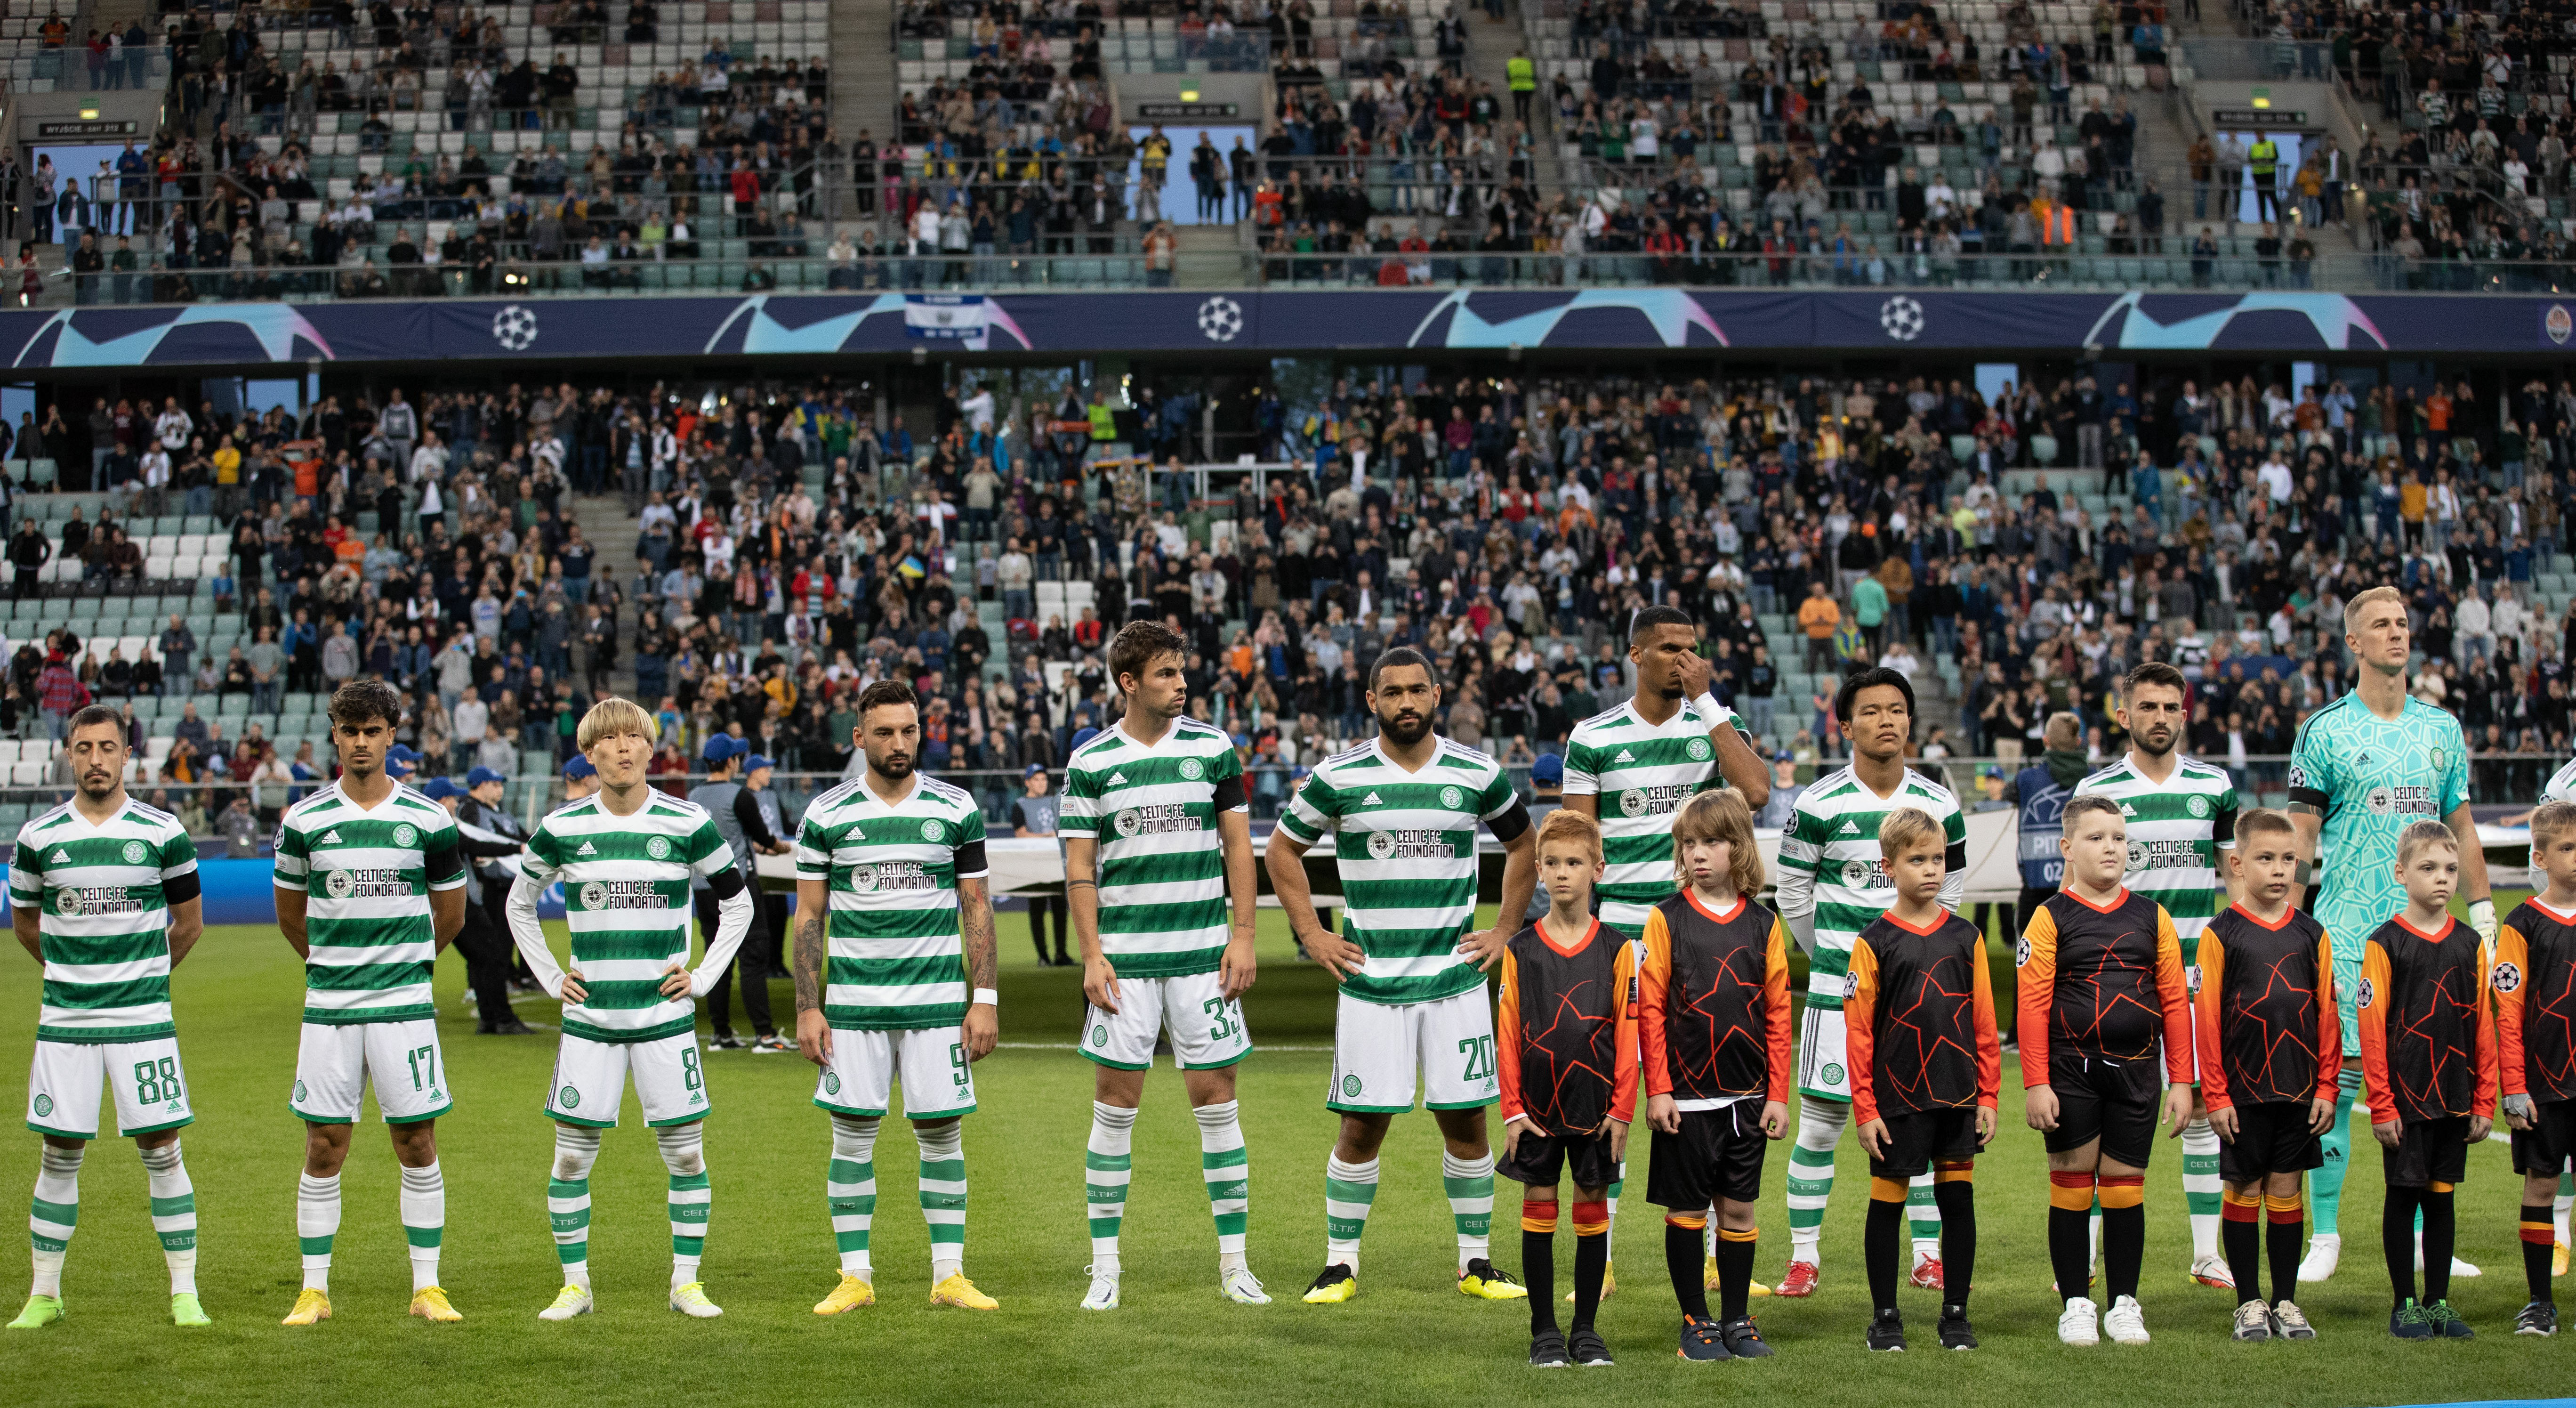 WARSAW, POLAND - SEPTEMBER 14: Celtic players line up for the Champions league anthem during a UEFA Champions League match between FC Shakhtar Donetsk and Celtic at the Stadion Wojska Polskiego, on September 14, 2022, in Warsaw, Poland. (Photo by Craig Williamson / SNS Group)